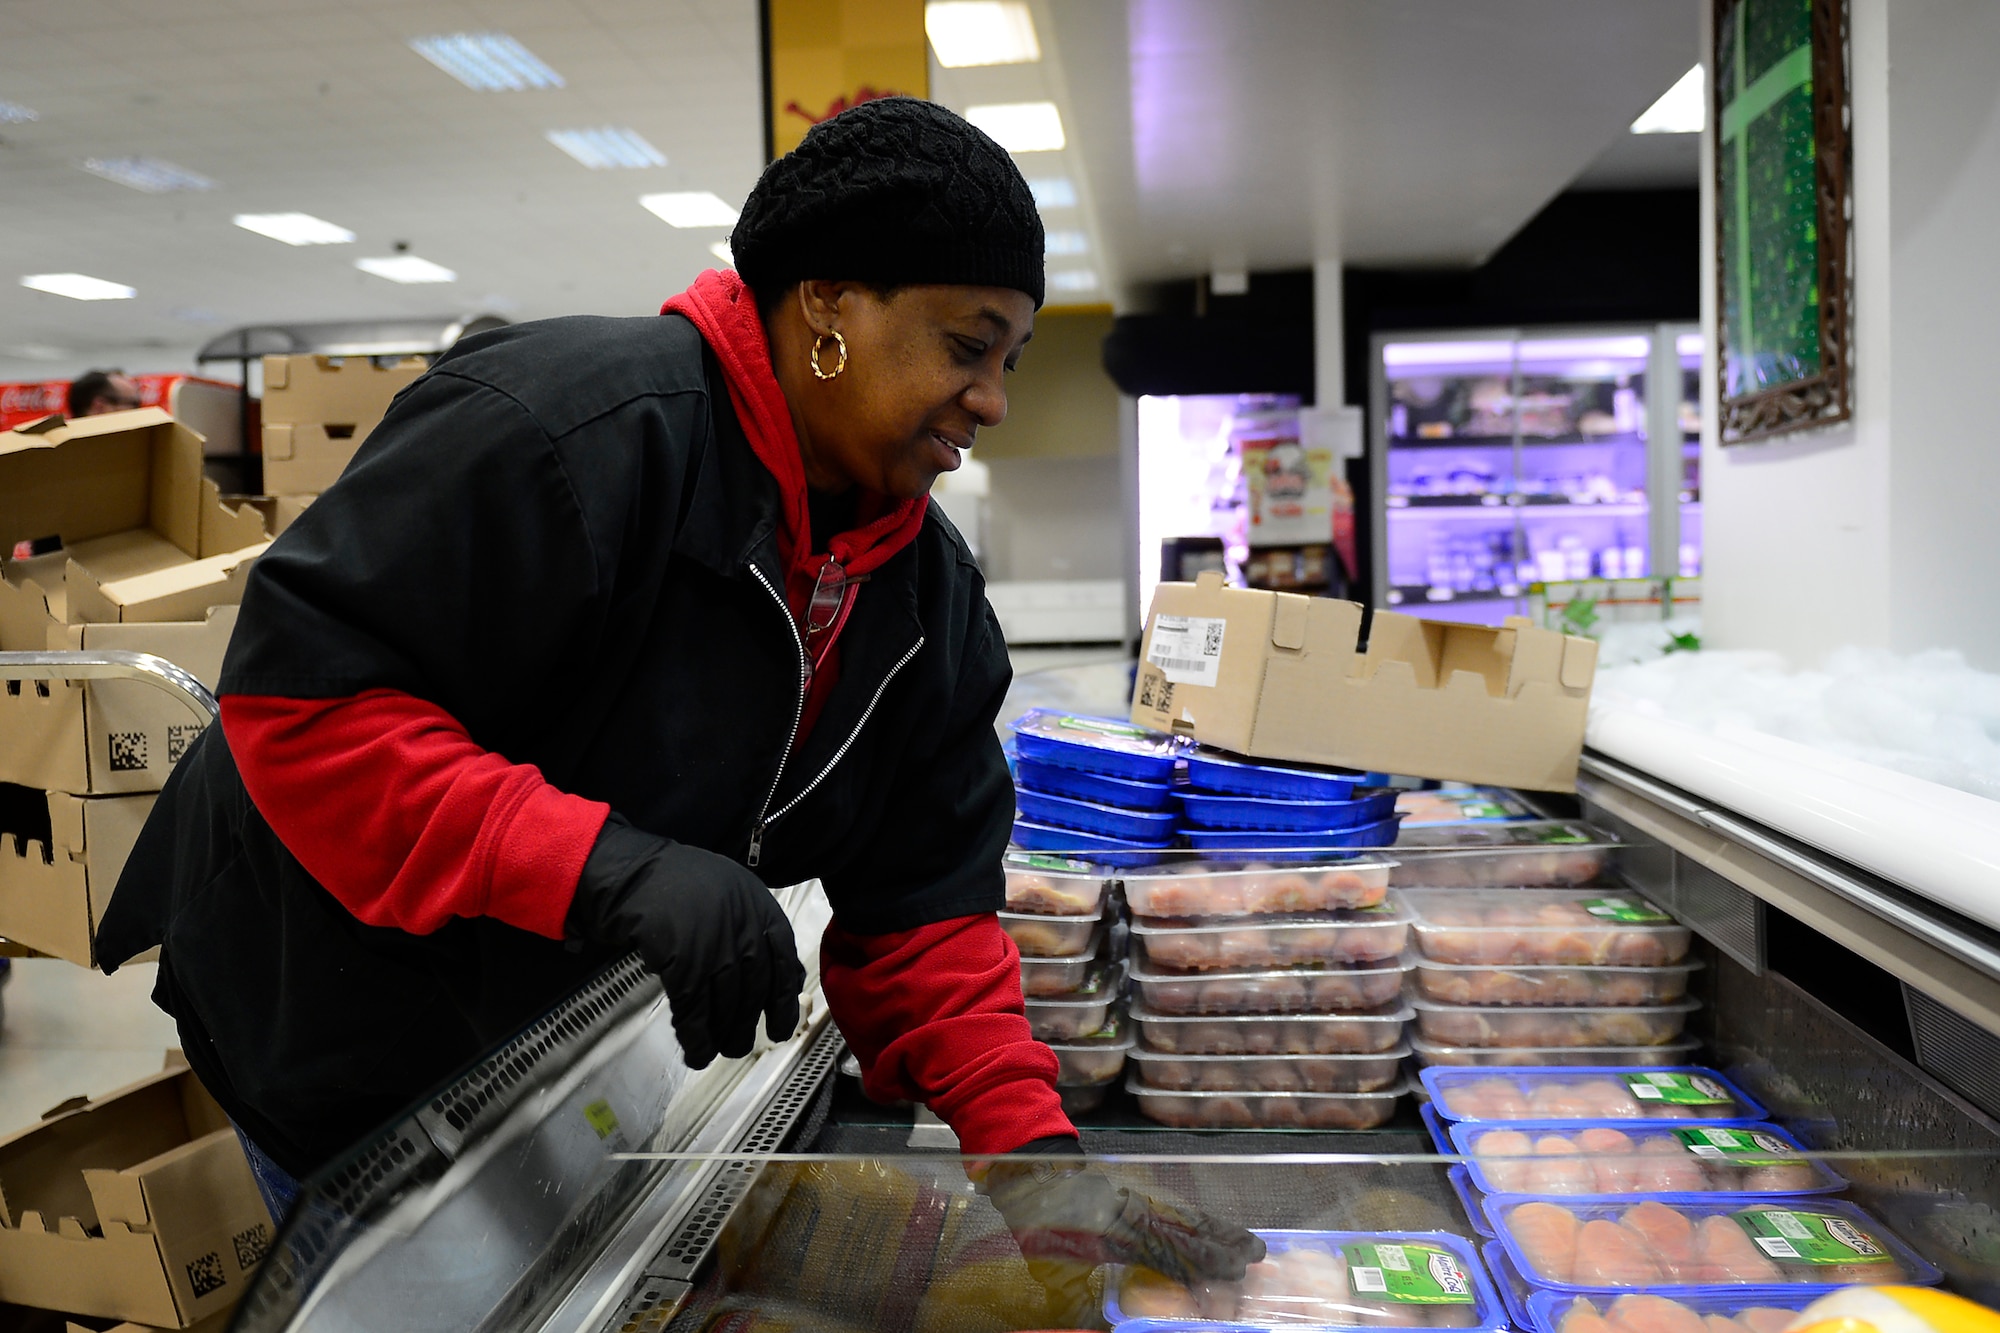 With almost 20 new employees, the staff helps to keep the products rotated and fresh for customers at the commissary at Royal Air Force Lakenheath, England, Dec. 7, 2015. Military personnel save an average of 30 percent or more shopping at the commissary. (U.S. Air Force photo by Airman 1st Class Erin R. Babis/Released)